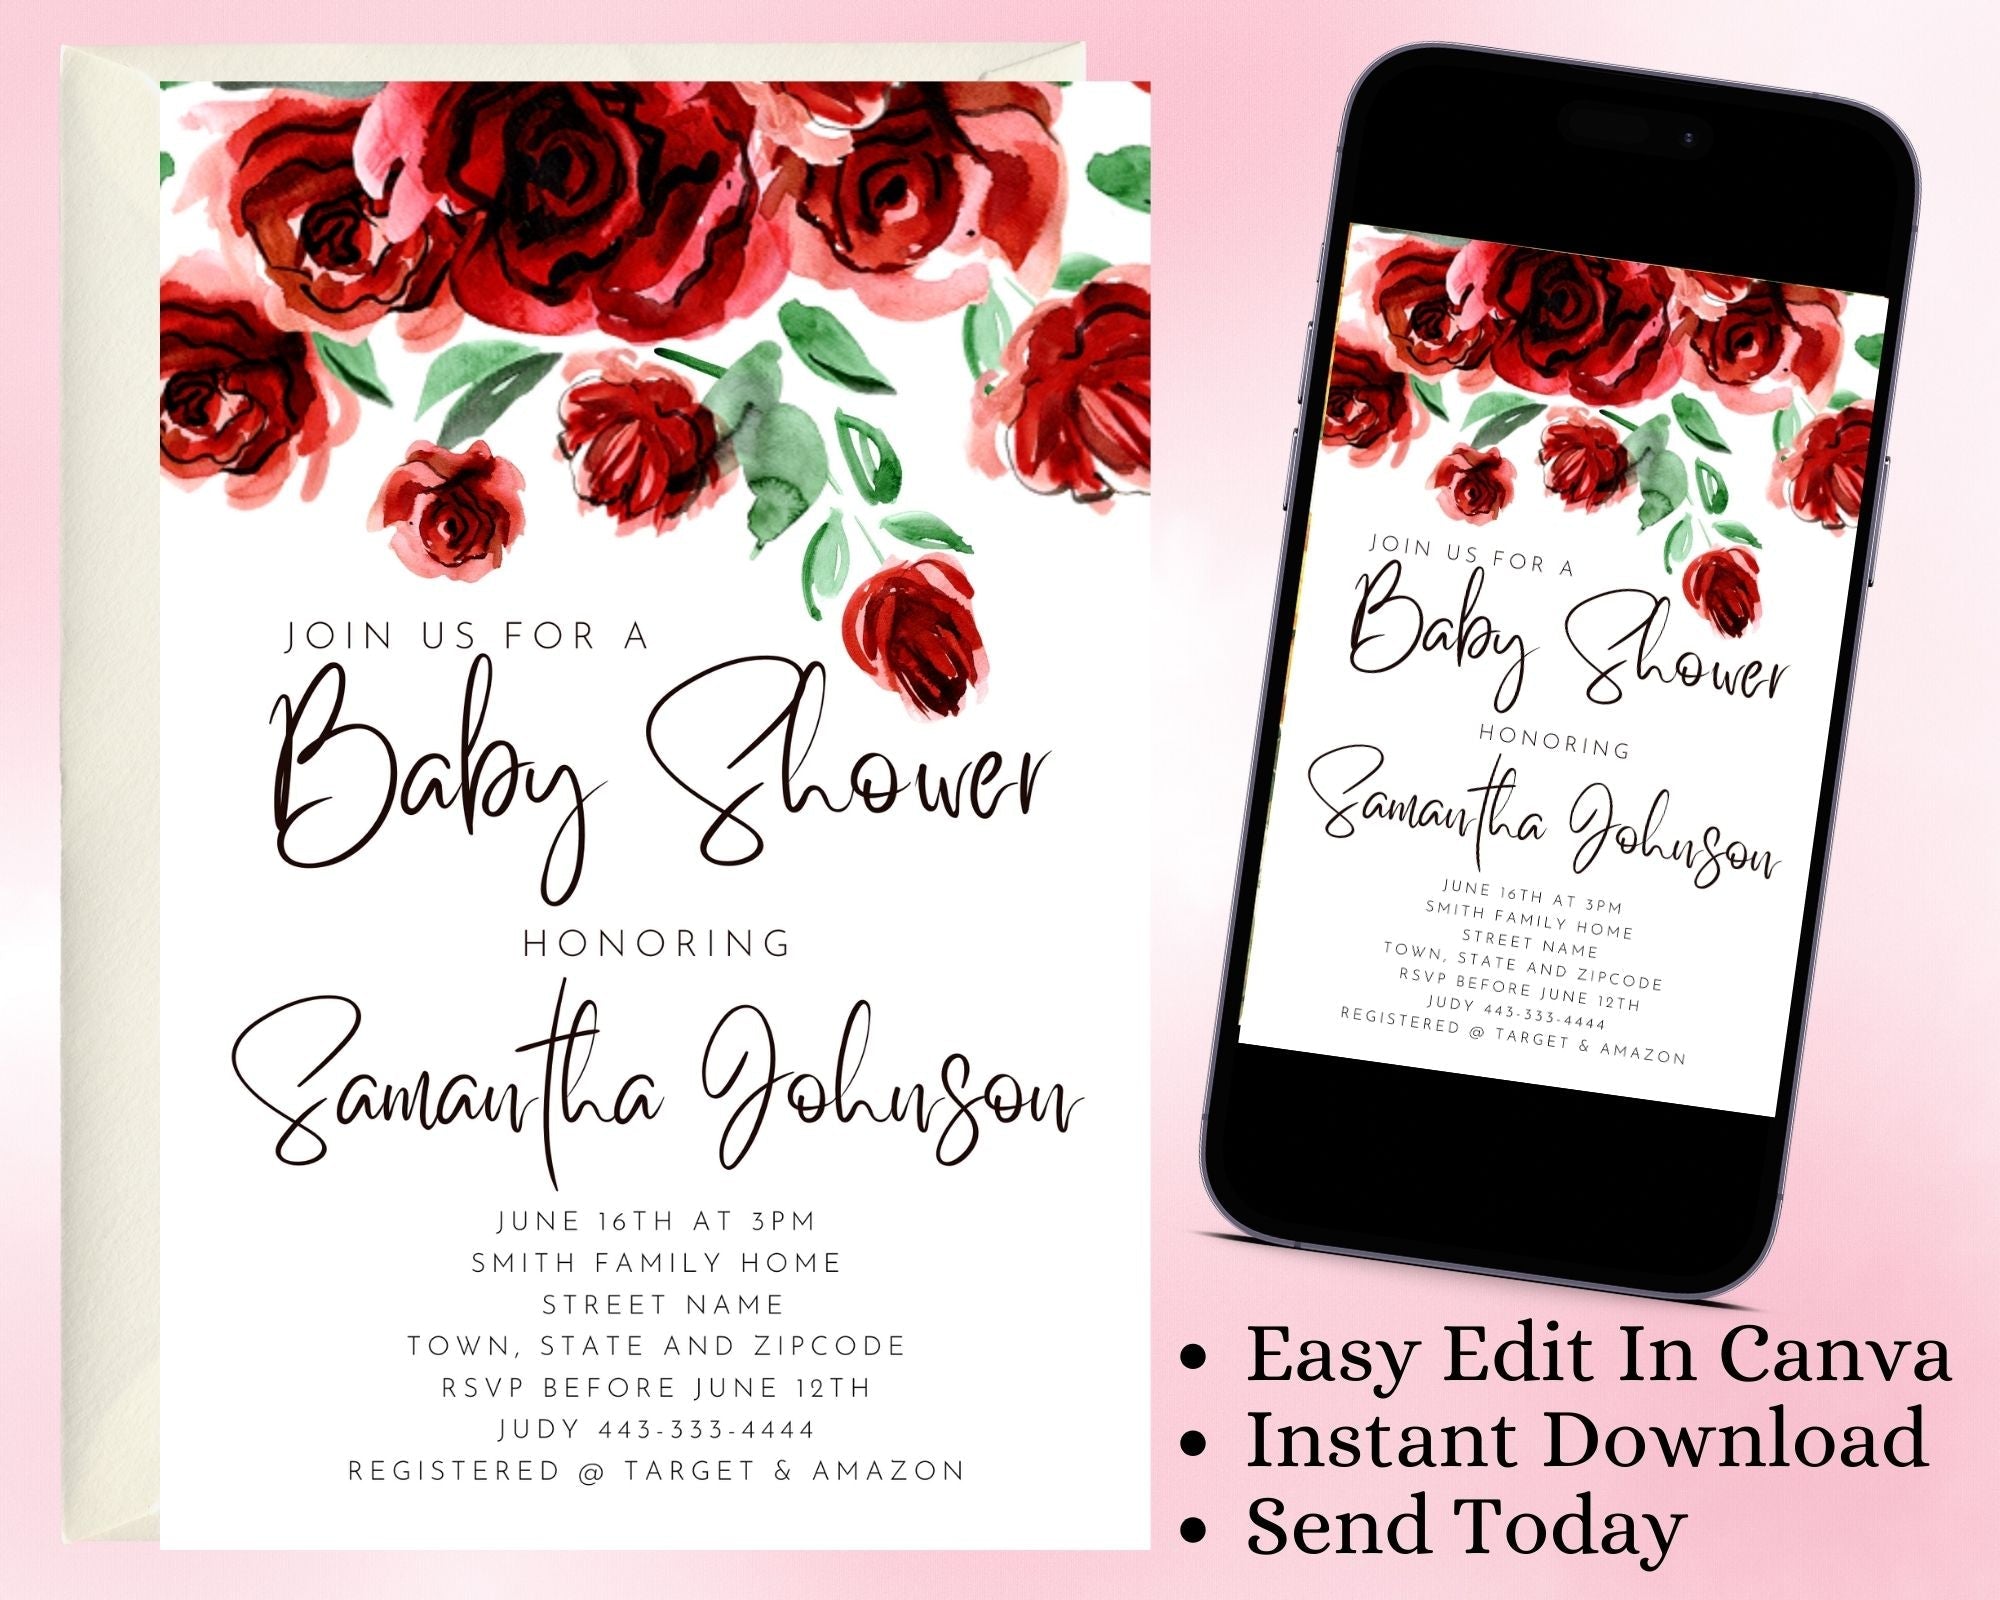 Red Rose Editable Invitation Personalize and Share For Any Occasion - Favors Today